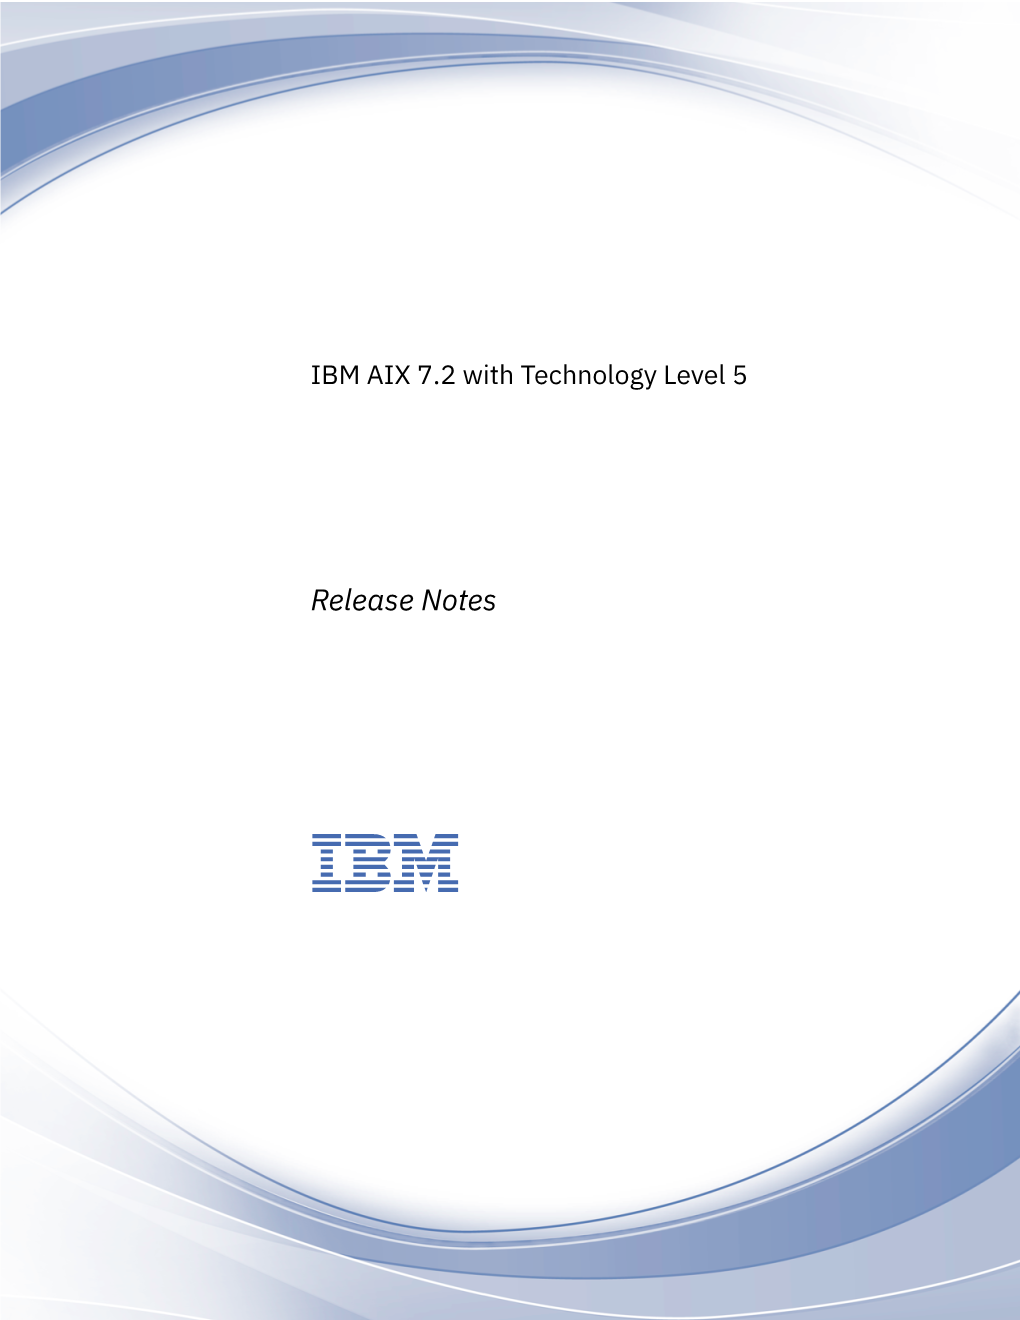 IBM AIX 7.2 with Technology Level 5: Release Notes IBM AIX 7.2 with Technology Level 5 Release Notes